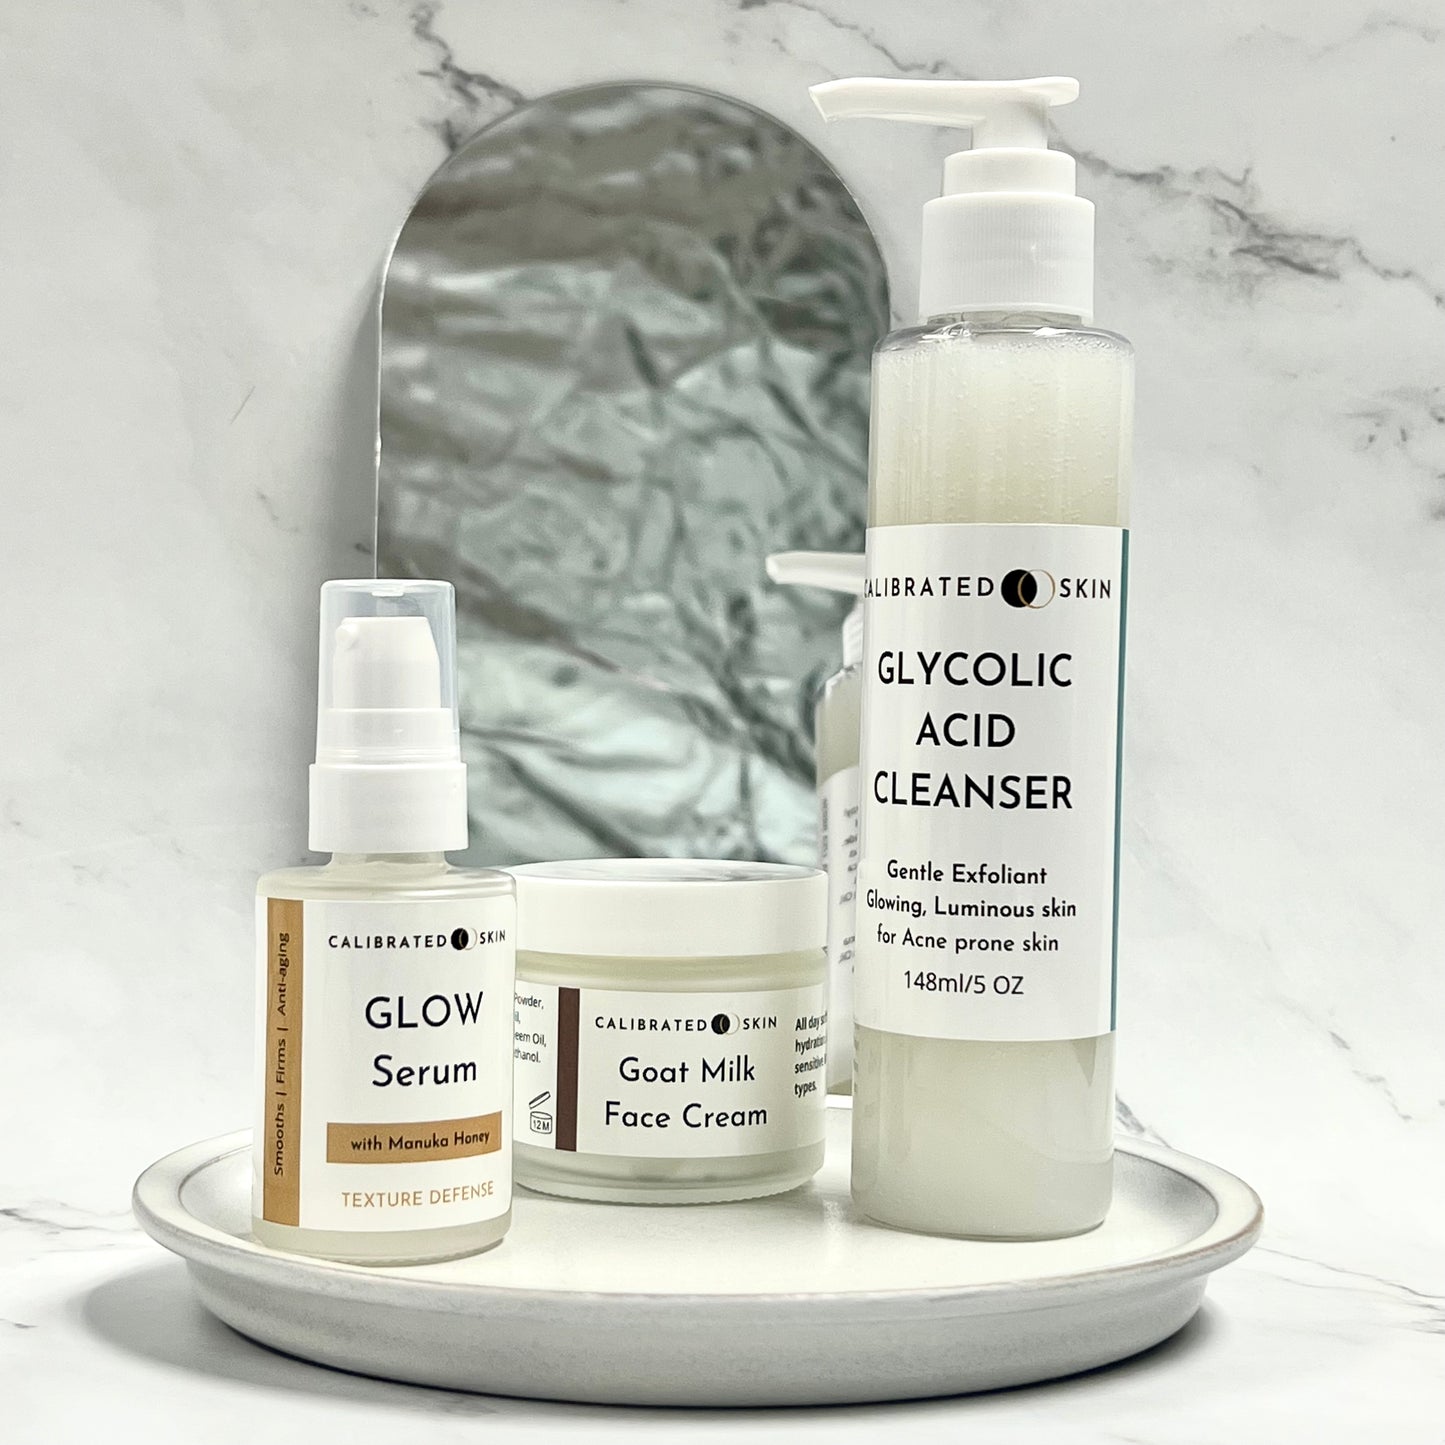 Glycolic Acid Face Cleanser (For Glowing Skin/Acne prone)